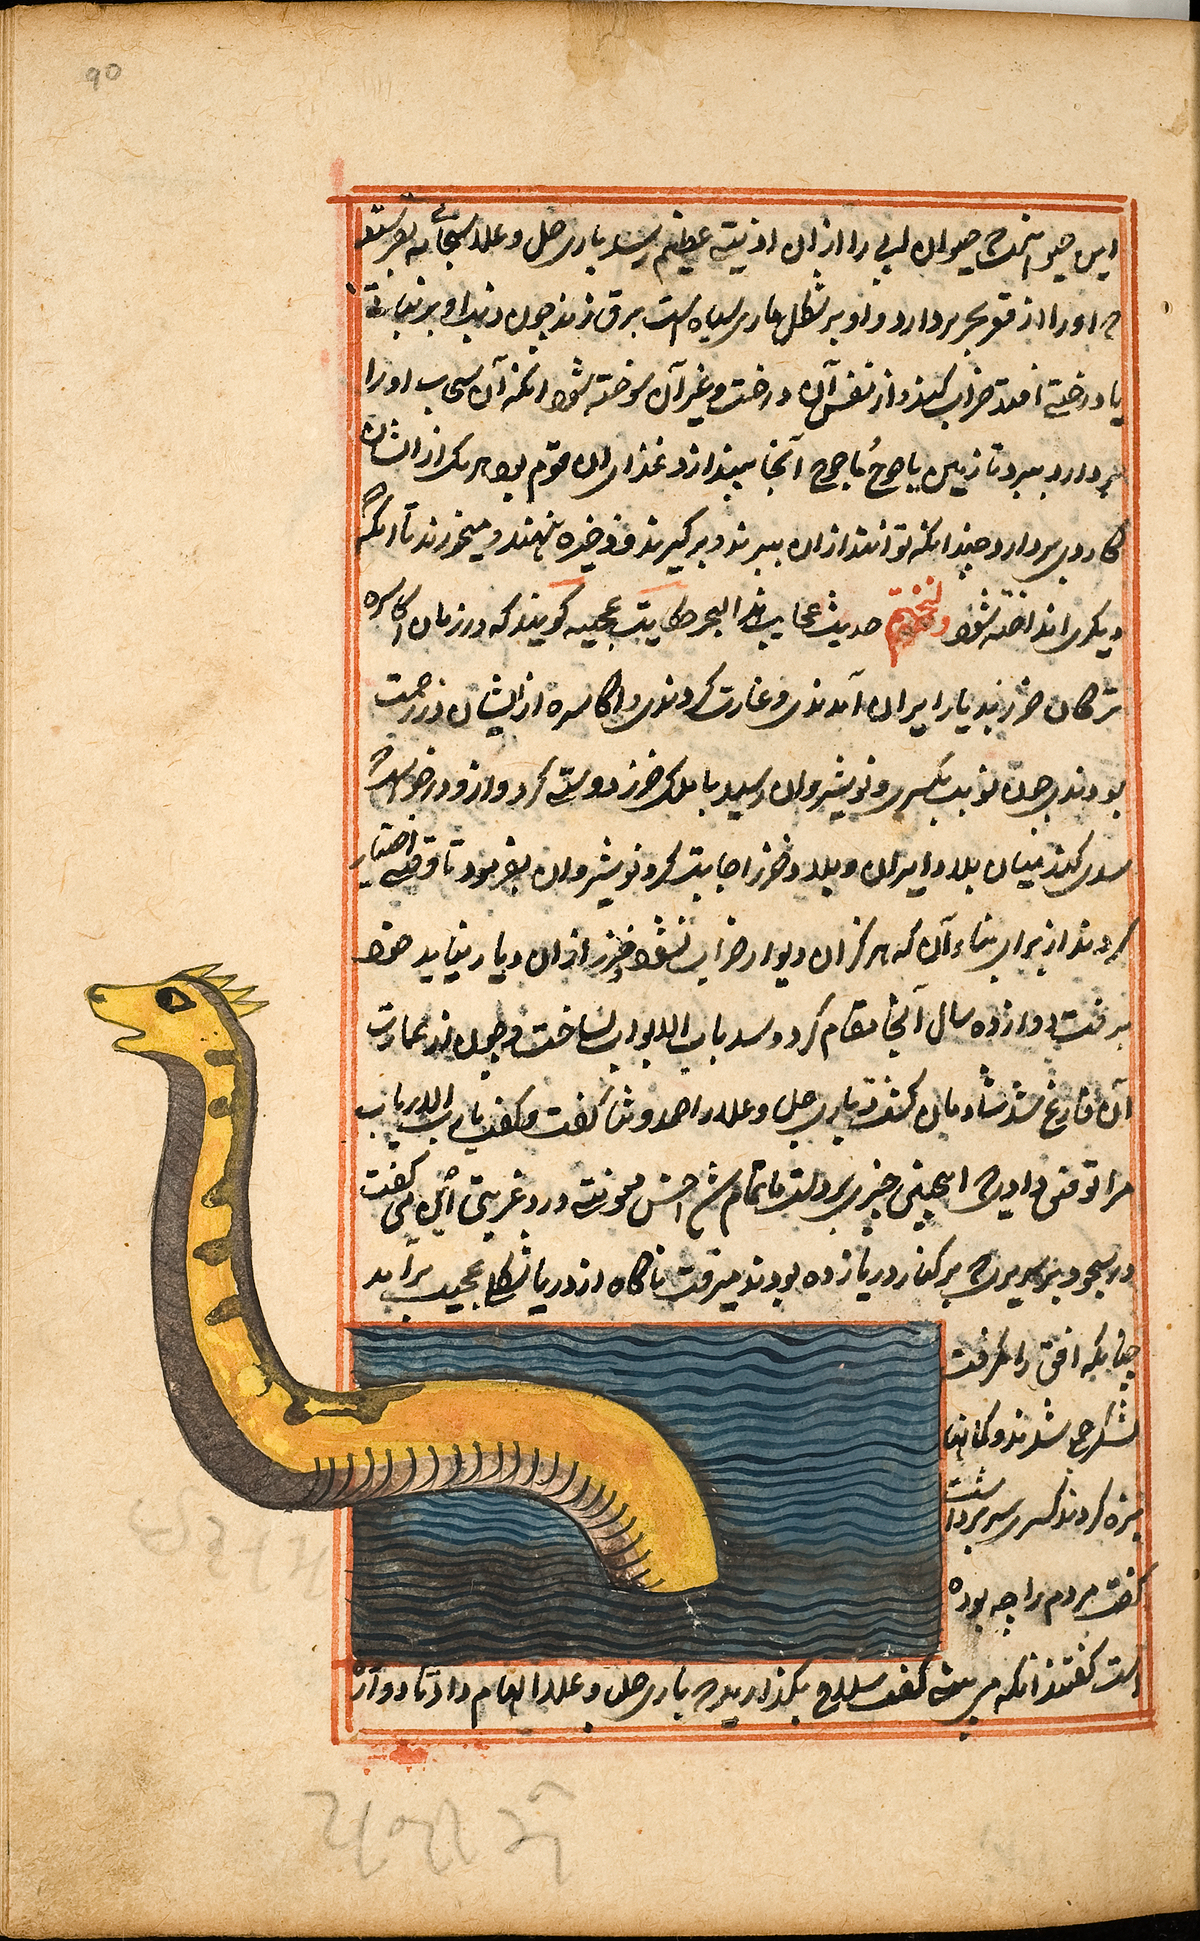 A large yellow spotted sea serpent lifting its head and upper body out of the water into the outer page of the margin, surrounded by Persian text and a red double ruled border.